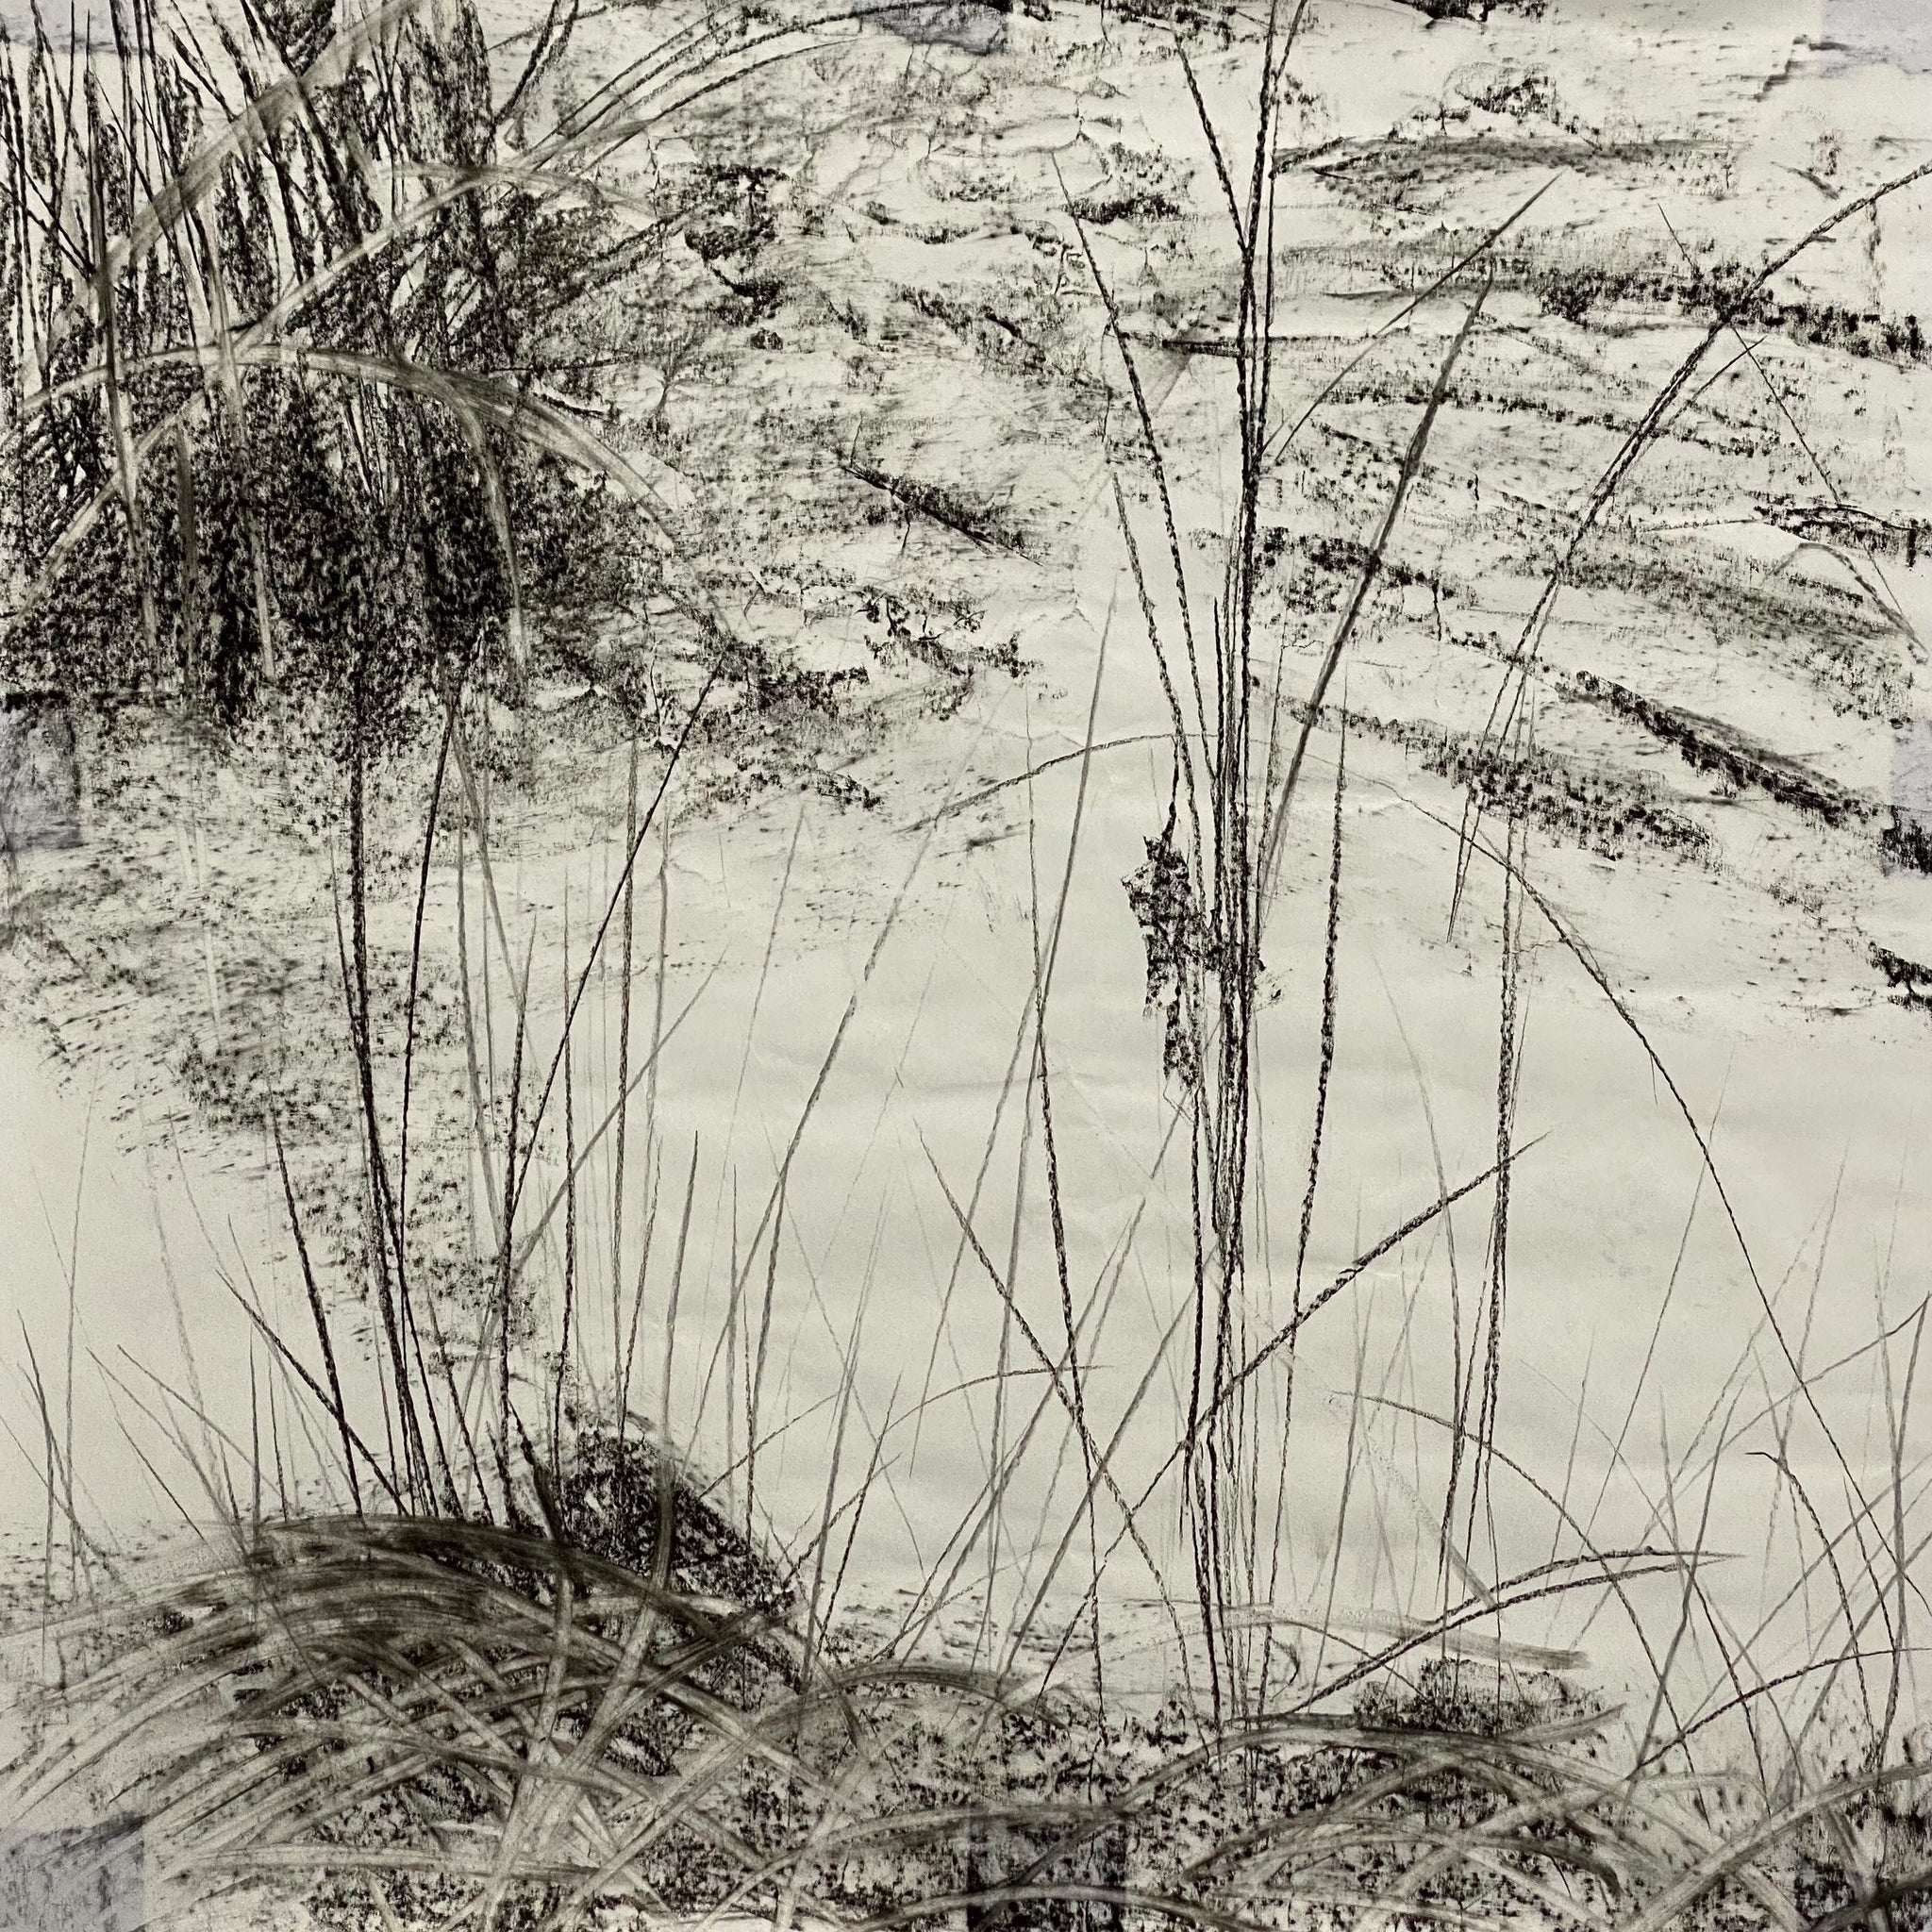 Juanita Bellavance, Caught up in grasses concept drawing, From the Chestatee River portfolio, 2021, Charcoal on paper, 24 x 24 inches.